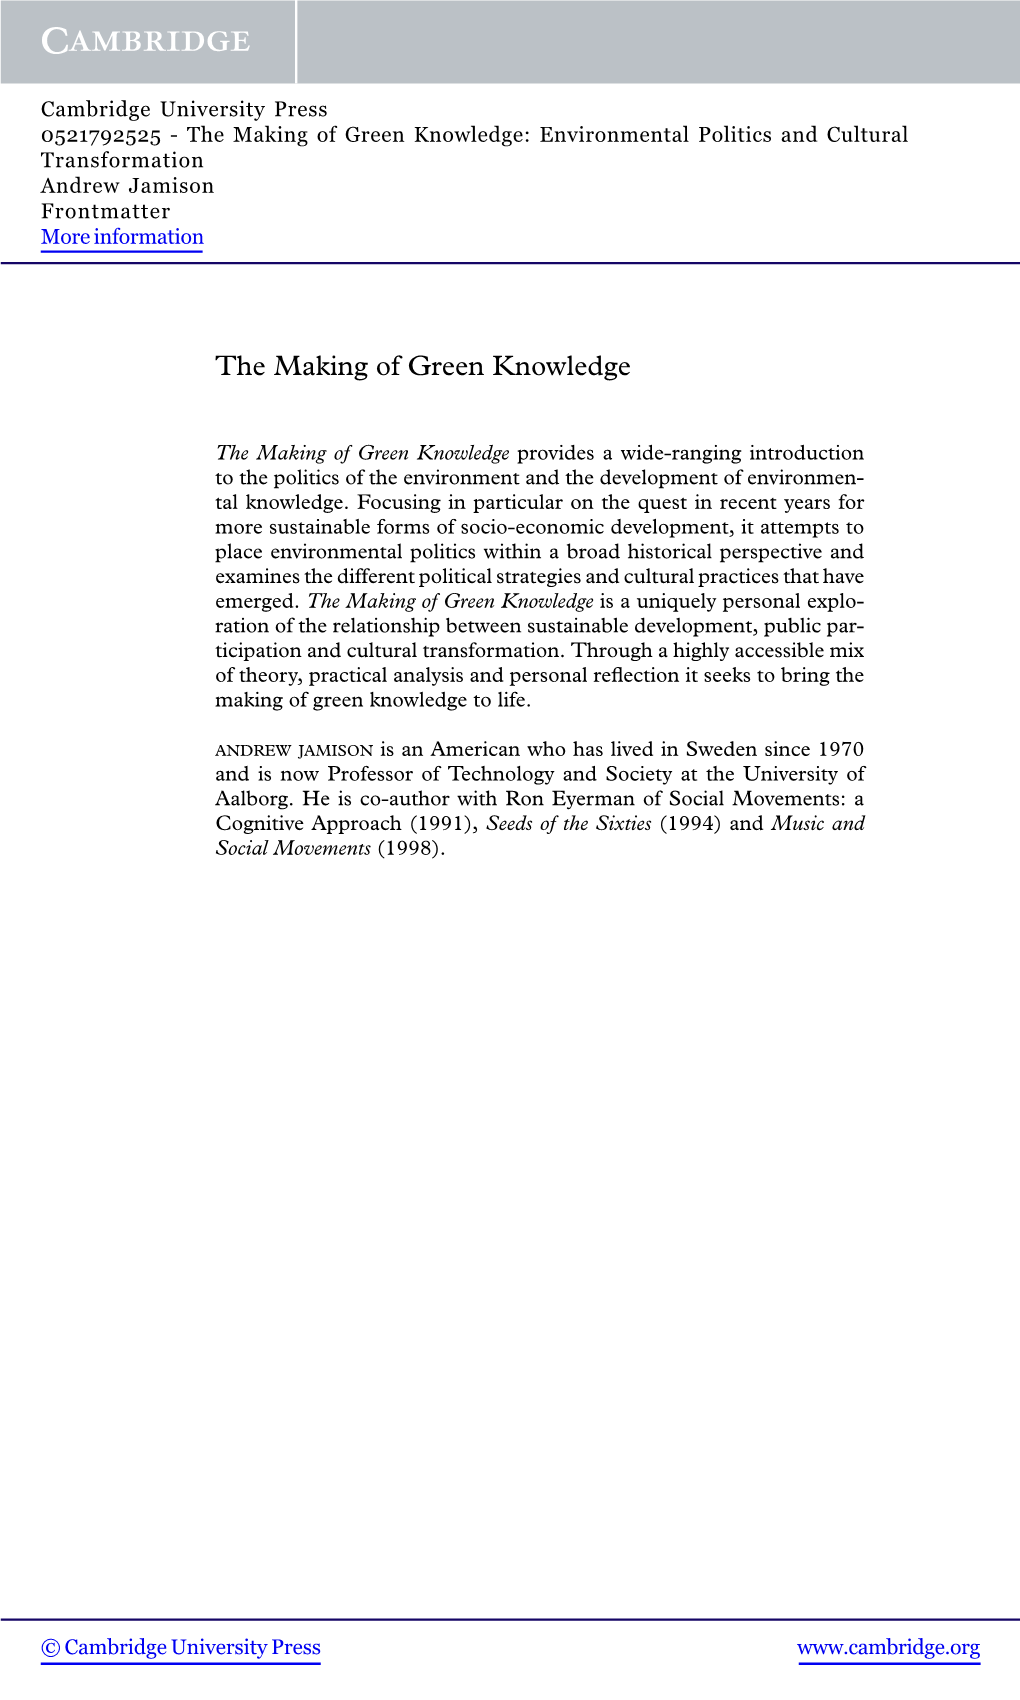 The Making of Green Knowledge: Environmental Politics and Cultural Transformation Andrew Jamison Frontmatter More Information